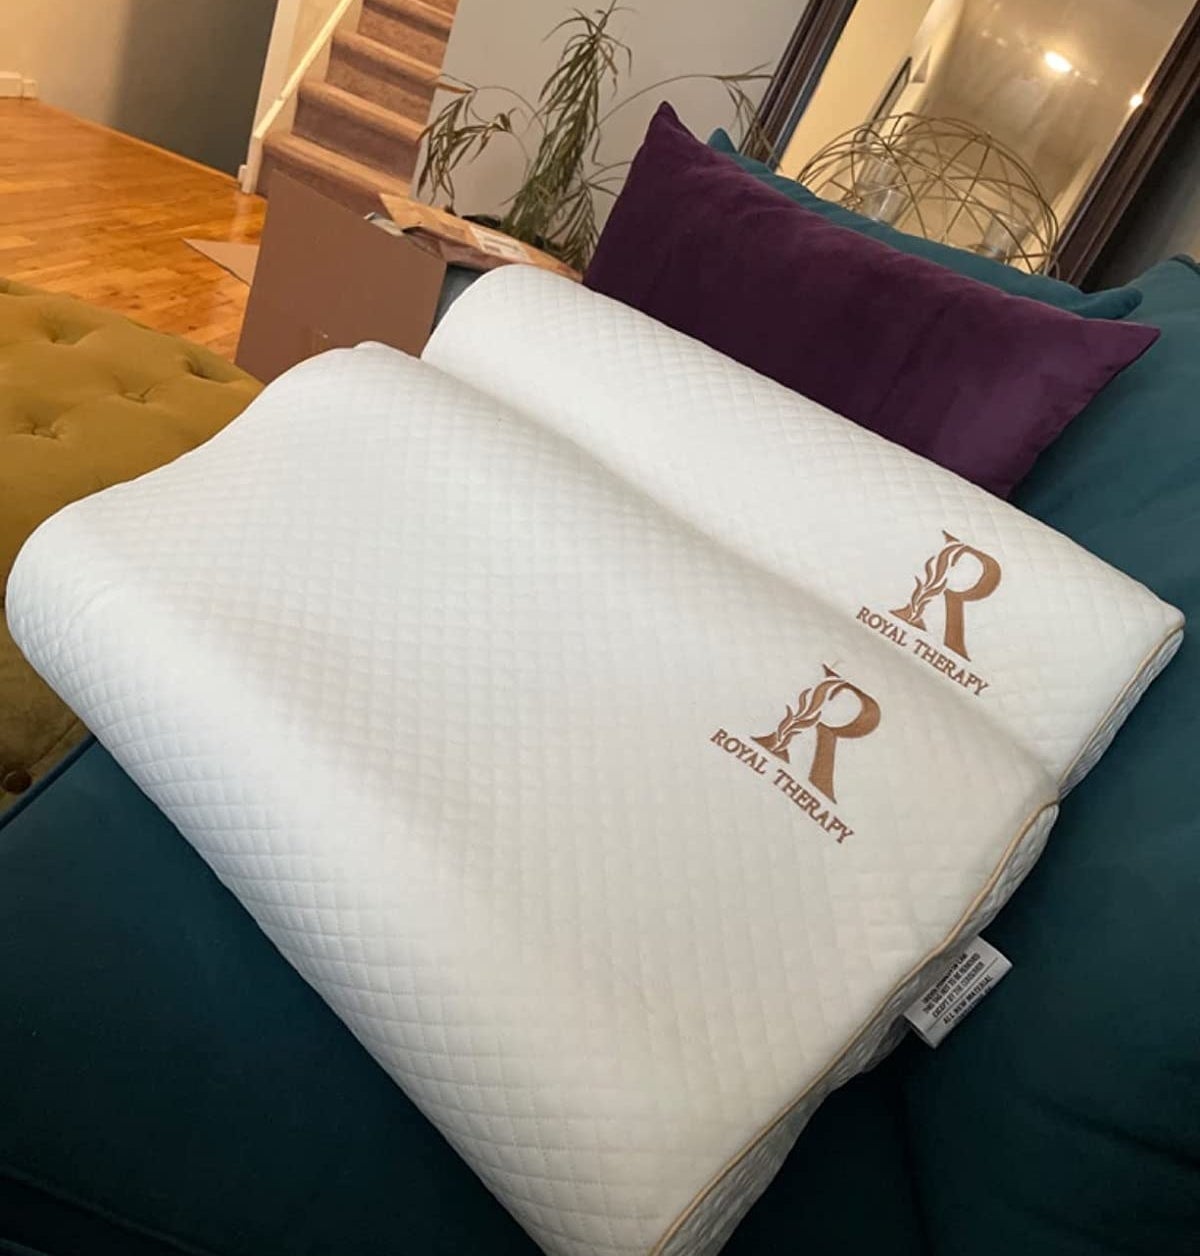 Reviewer image of two memory foam pillows on their couch